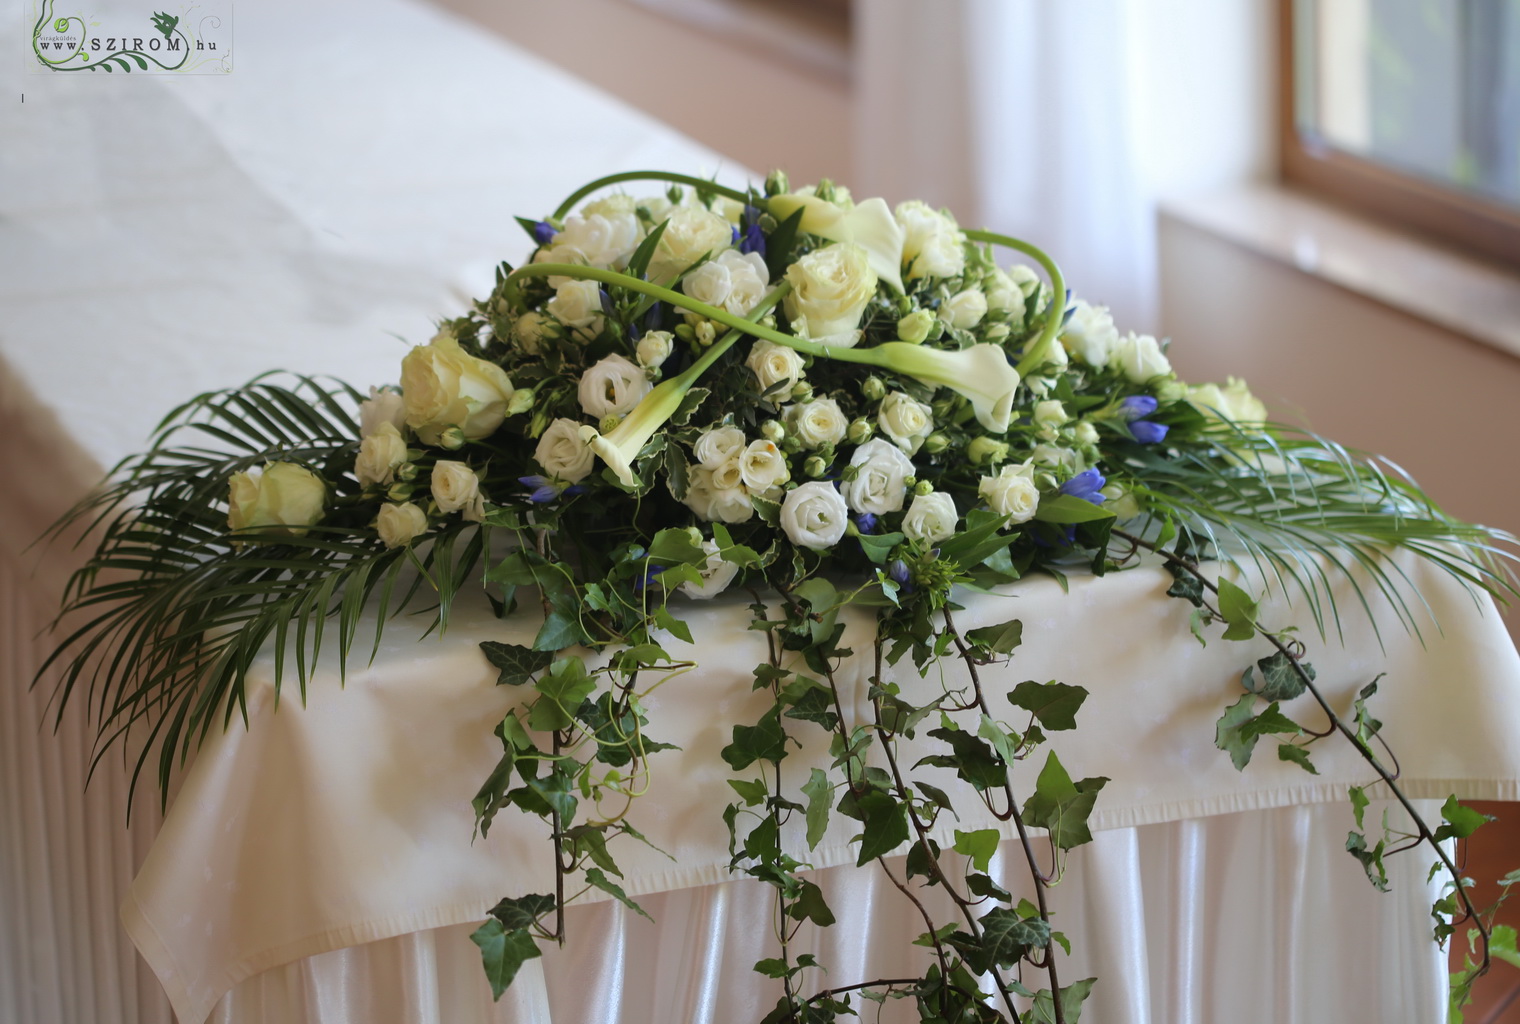 flower delivery Budapest - Main table centerpiece (calla, rose, lisianthus, gentiana, white, blue)